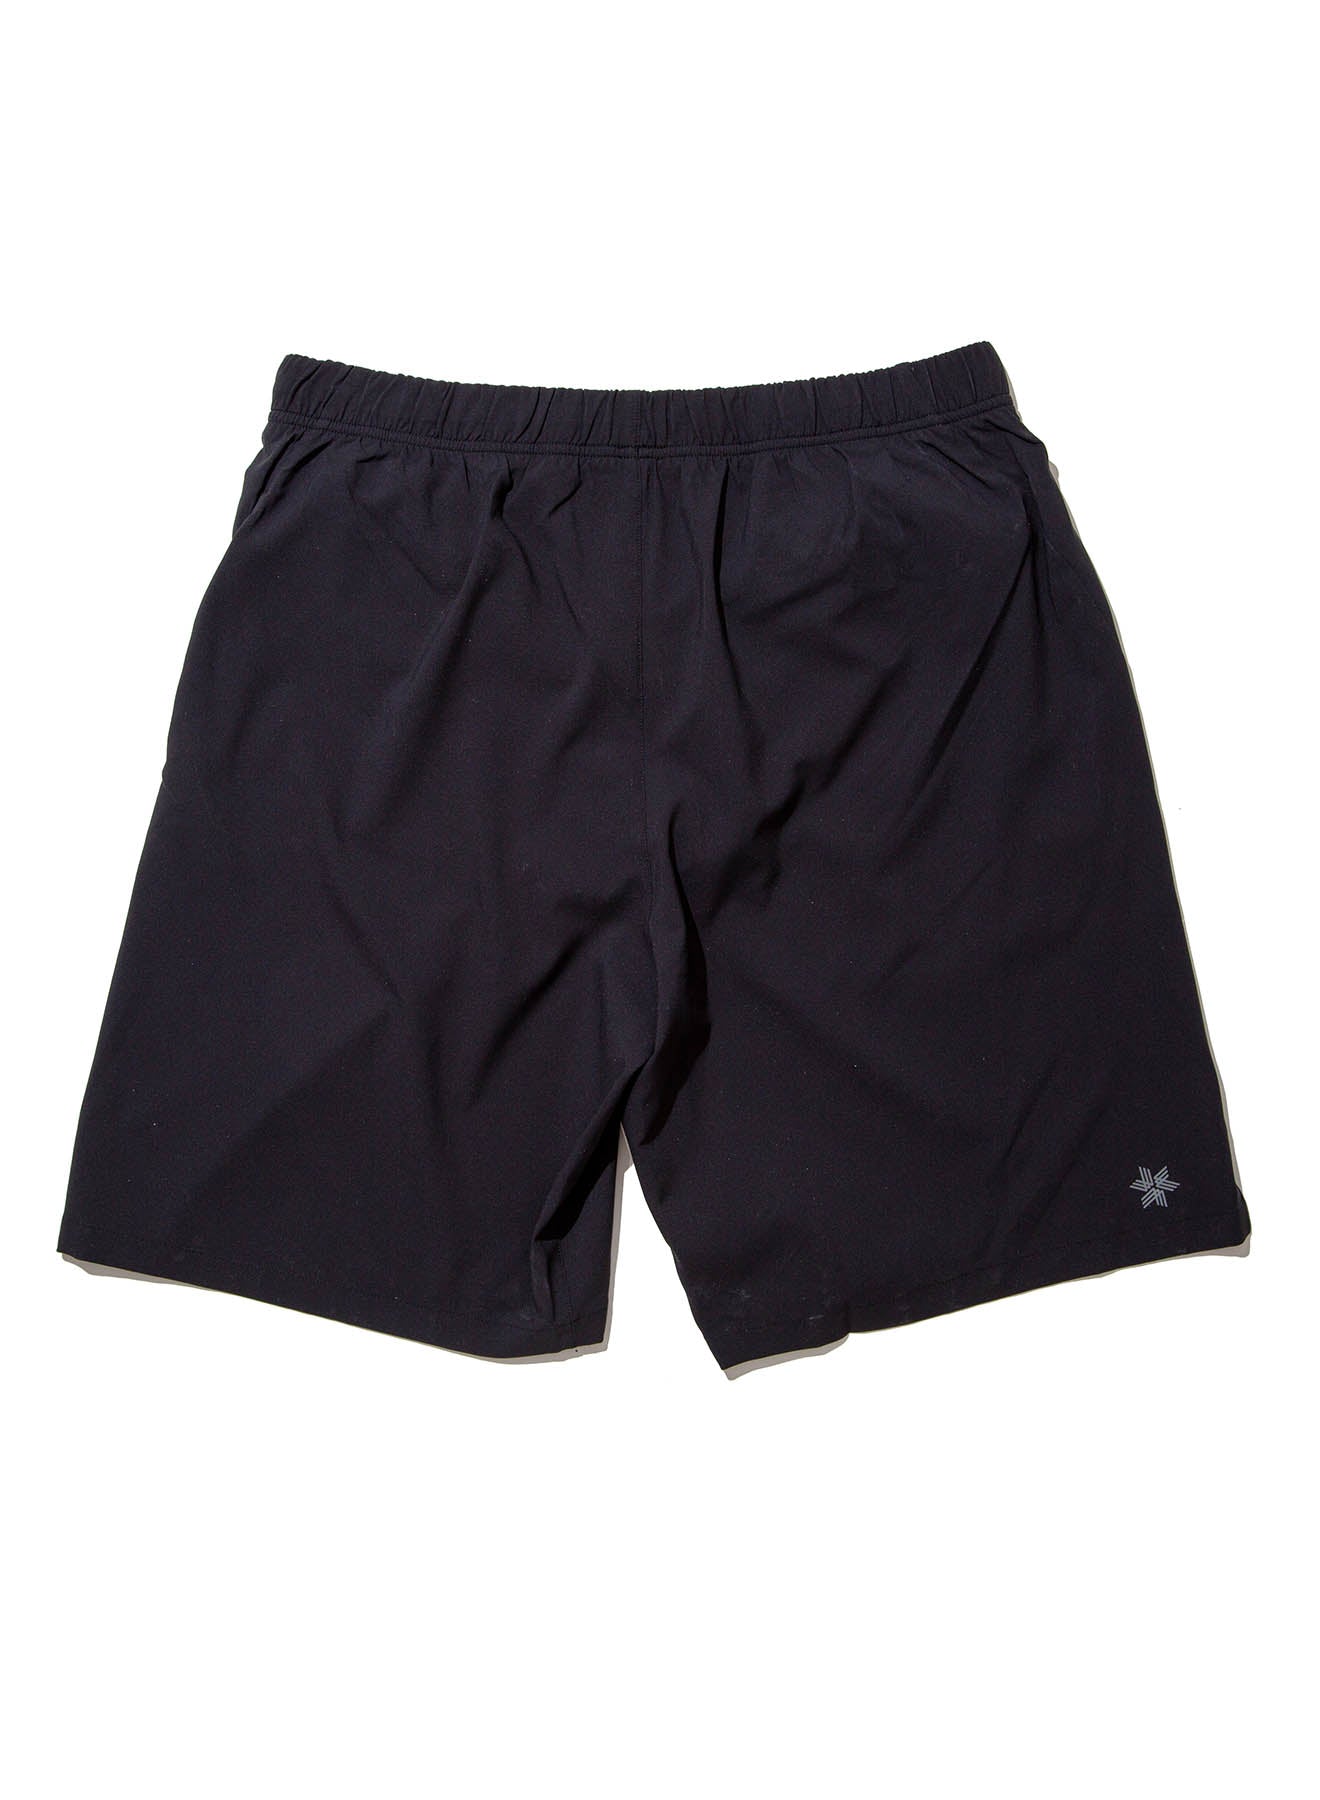 Woven Utility Shorts (with Mesh Liner)